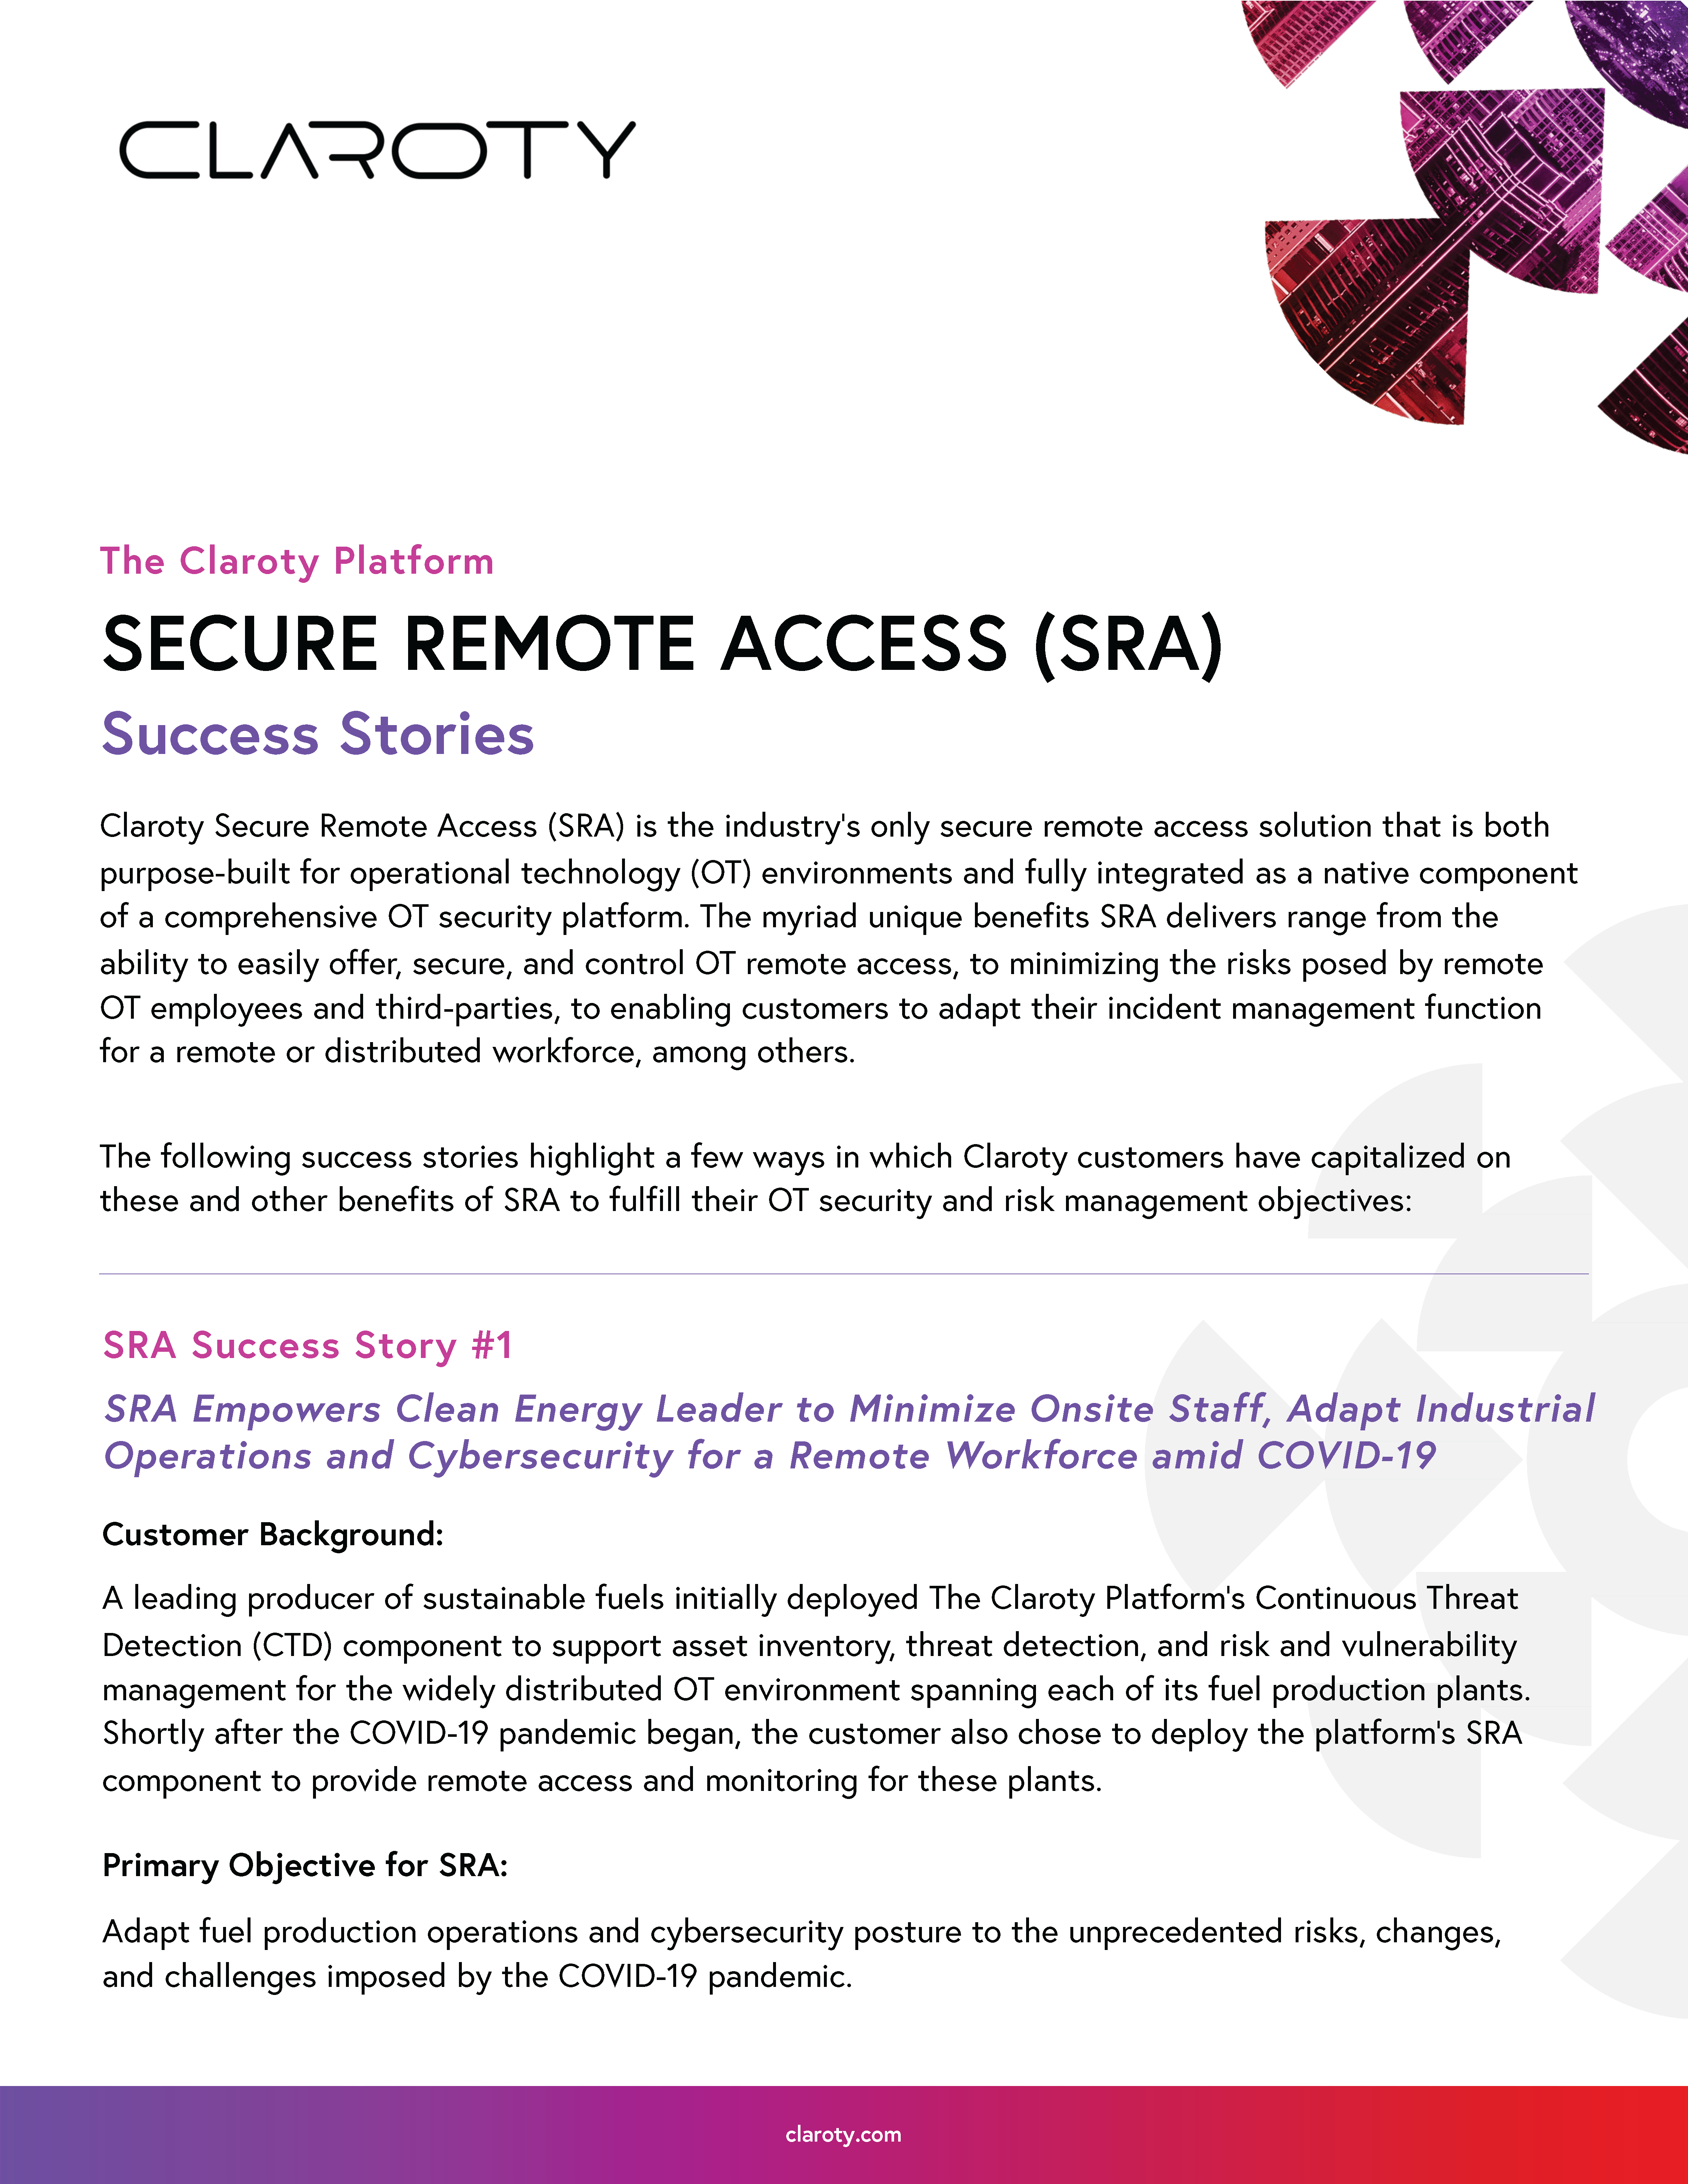 Pages from SRA Success Stories